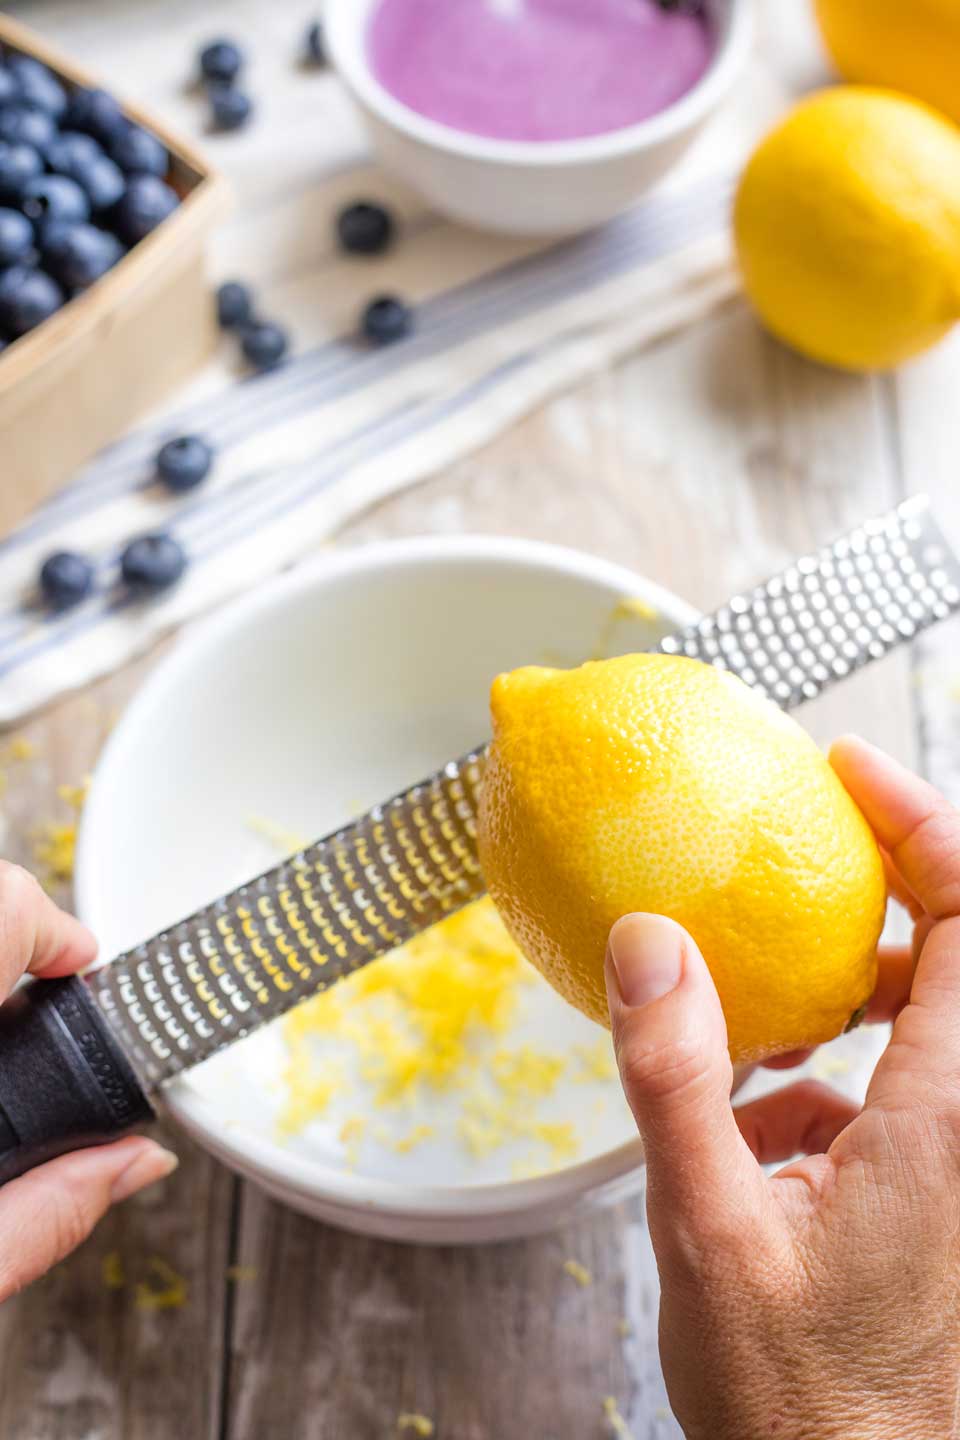 a whole lemon being zested with a microplane grater so the zest falls into a bowl below